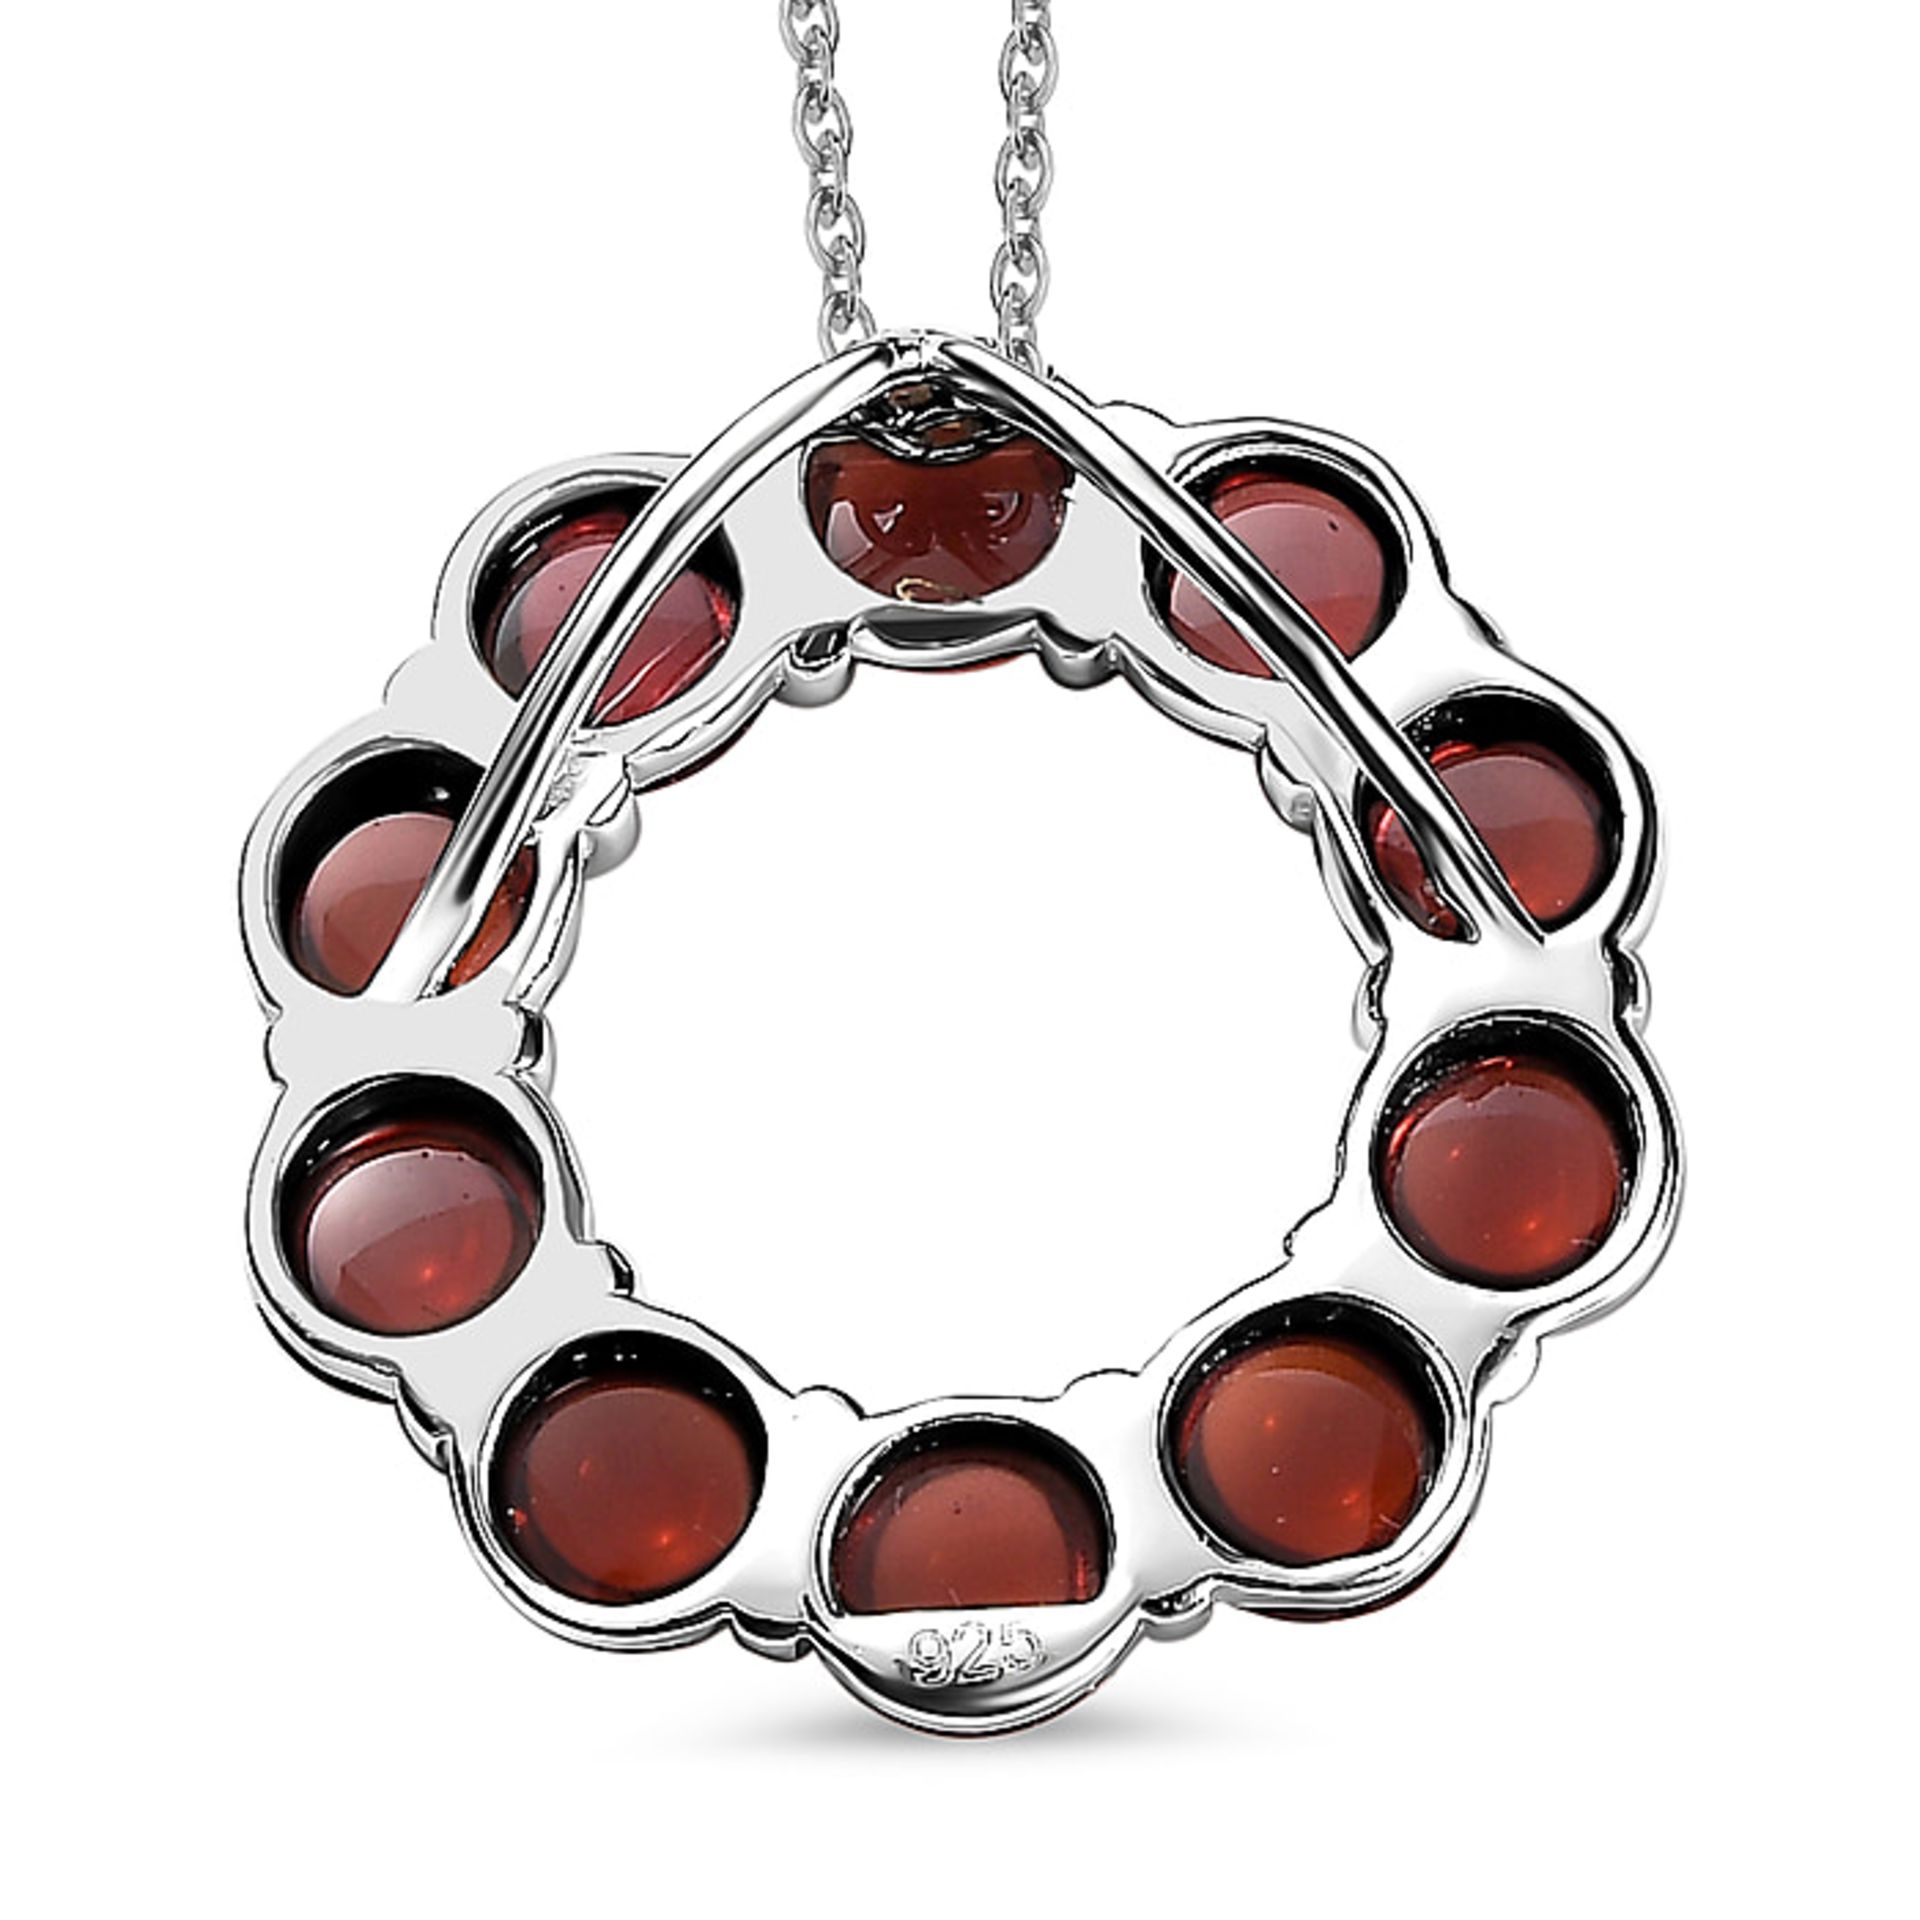 New! Red Garnet Sterling Silver Circle Pendant with Chain - Image 5 of 6